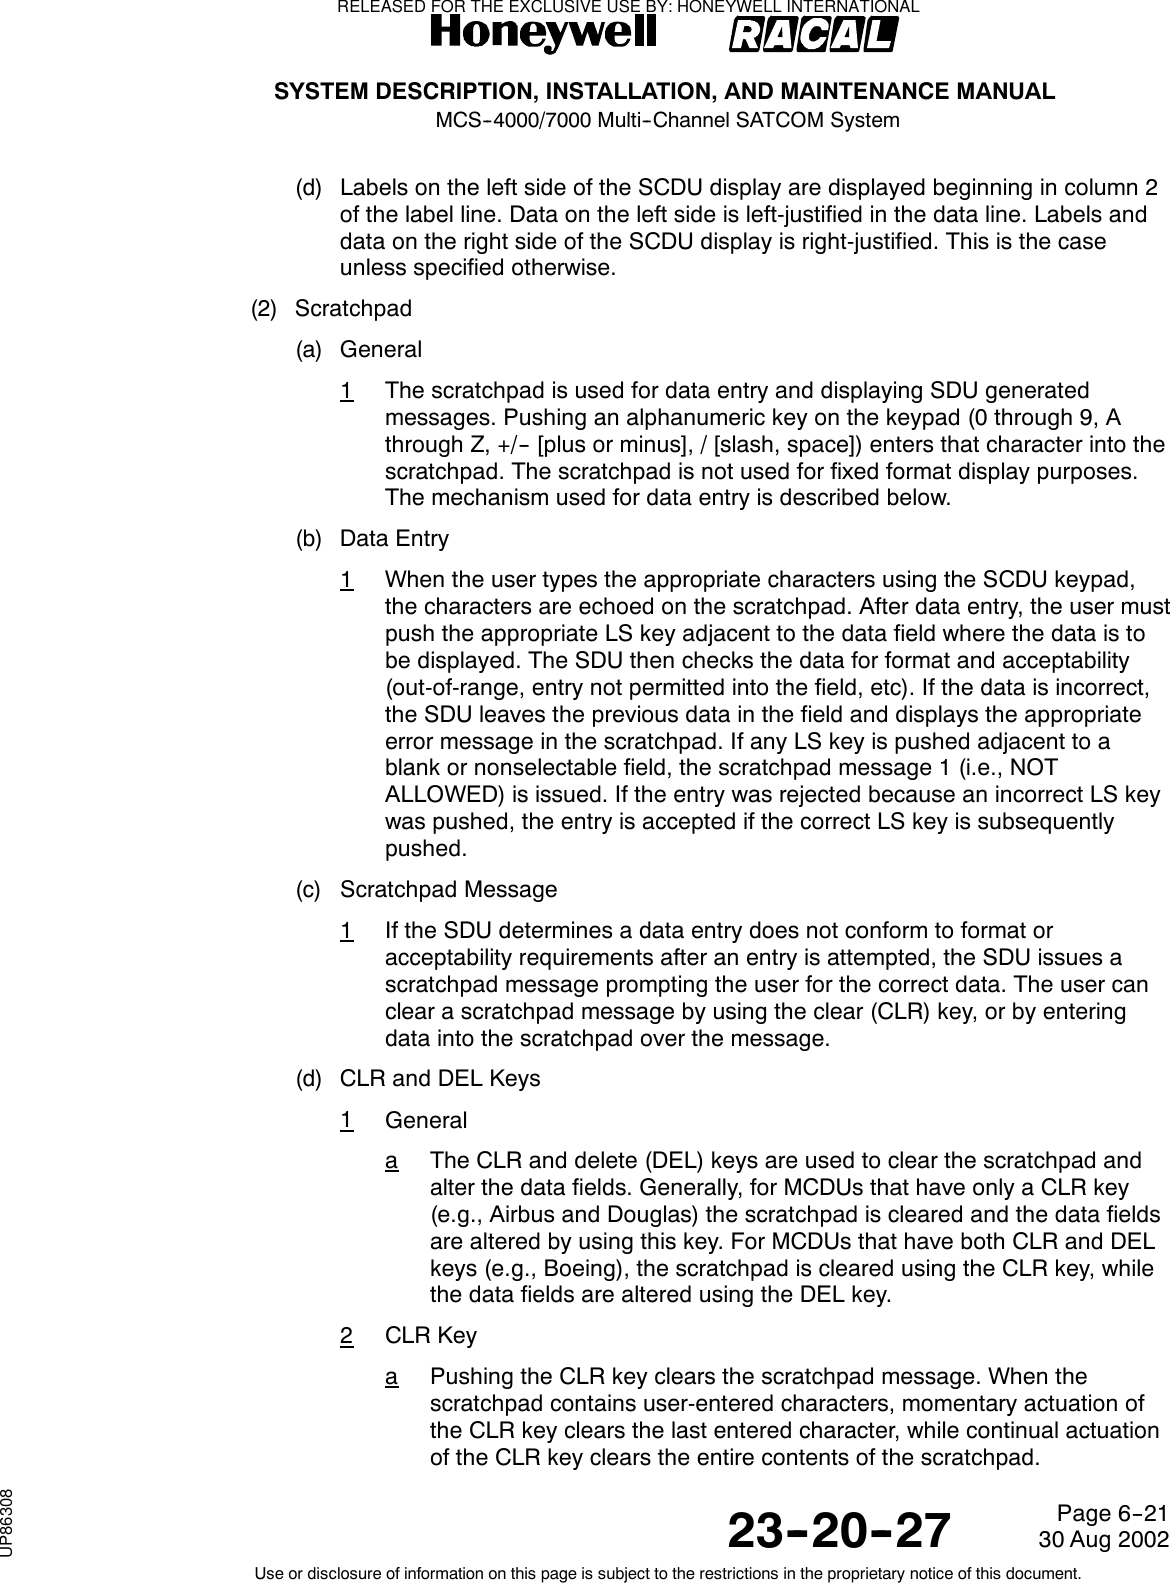 SYSTEM DESCRIPTION, INSTALLATION, AND MAINTENANCE MANUALMCS--4000/7000 Multi--Channel SATCOM System23--20--2730 Aug 2002Use or disclosure of information on this page is subject to the restrictions in the proprietary notice of this document.Page 6--21(d) Labels on the left side of the SCDU display are displayed beginning in column 2of the label line. Data on the left side is left-justified in the data line. Labels anddata on the right side of the SCDU display is right-justified. This is the caseunless specified otherwise.(2) Scratchpad(a) General1The scratchpad is used for data entry and displaying SDU generatedmessages. Pushing an alphanumeric key on the keypad (0 through 9, Athrough Z, +/-- [plus or minus], / [slash, space]) enters that character into thescratchpad. The scratchpad is not used for fixed format display purposes.The mechanism used for data entry is described below.(b) Data Entry1When the user types the appropriate characters using the SCDU keypad,the characters are echoed on the scratchpad. After data entry, the user mustpush the appropriate LS key adjacent to the data field where the data is tobe displayed. The SDU then checks the data for format and acceptability(out-of-range, entry not permitted into the field, etc). If the data is incorrect,the SDU leaves the previous data in the field and displays the appropriateerror message in the scratchpad. If any LS key is pushed adjacent to ablank or nonselectable field, the scratchpad message 1 (i.e., NOTALLOWED) is issued. If the entry was rejected because an incorrect LS keywas pushed, the entry is accepted if the correct LS key is subsequentlypushed.(c) Scratchpad Message1If the SDU determines a data entry does not conform to format oracceptability requirements after an entry is attempted, the SDU issues ascratchpad message prompting the user for the correct data. The user canclear a scratchpad message by using the clear (CLR) key, or by enteringdata into the scratchpad over the message.(d) CLR and DEL Keys1GeneralaThe CLR and delete (DEL) keys are used to clear the scratchpad andalter the data fields. Generally, for MCDUs that have only a CLR key(e.g., Airbus and Douglas) the scratchpad is cleared and the data fieldsare altered by using this key. For MCDUs that have both CLR and DELkeys (e.g., Boeing), the scratchpad is cleared using the CLR key, whilethedatafieldsarealteredusingtheDELkey.2CLR KeyaPushing the CLR key clears the scratchpad message. When thescratchpad contains user-entered characters, momentary actuation ofthe CLR key clears the last entered character, while continual actuationof the CLR key clears the entire contents of the scratchpad.RELEASED FOR THE EXCLUSIVE USE BY: HONEYWELL INTERNATIONALUP86308